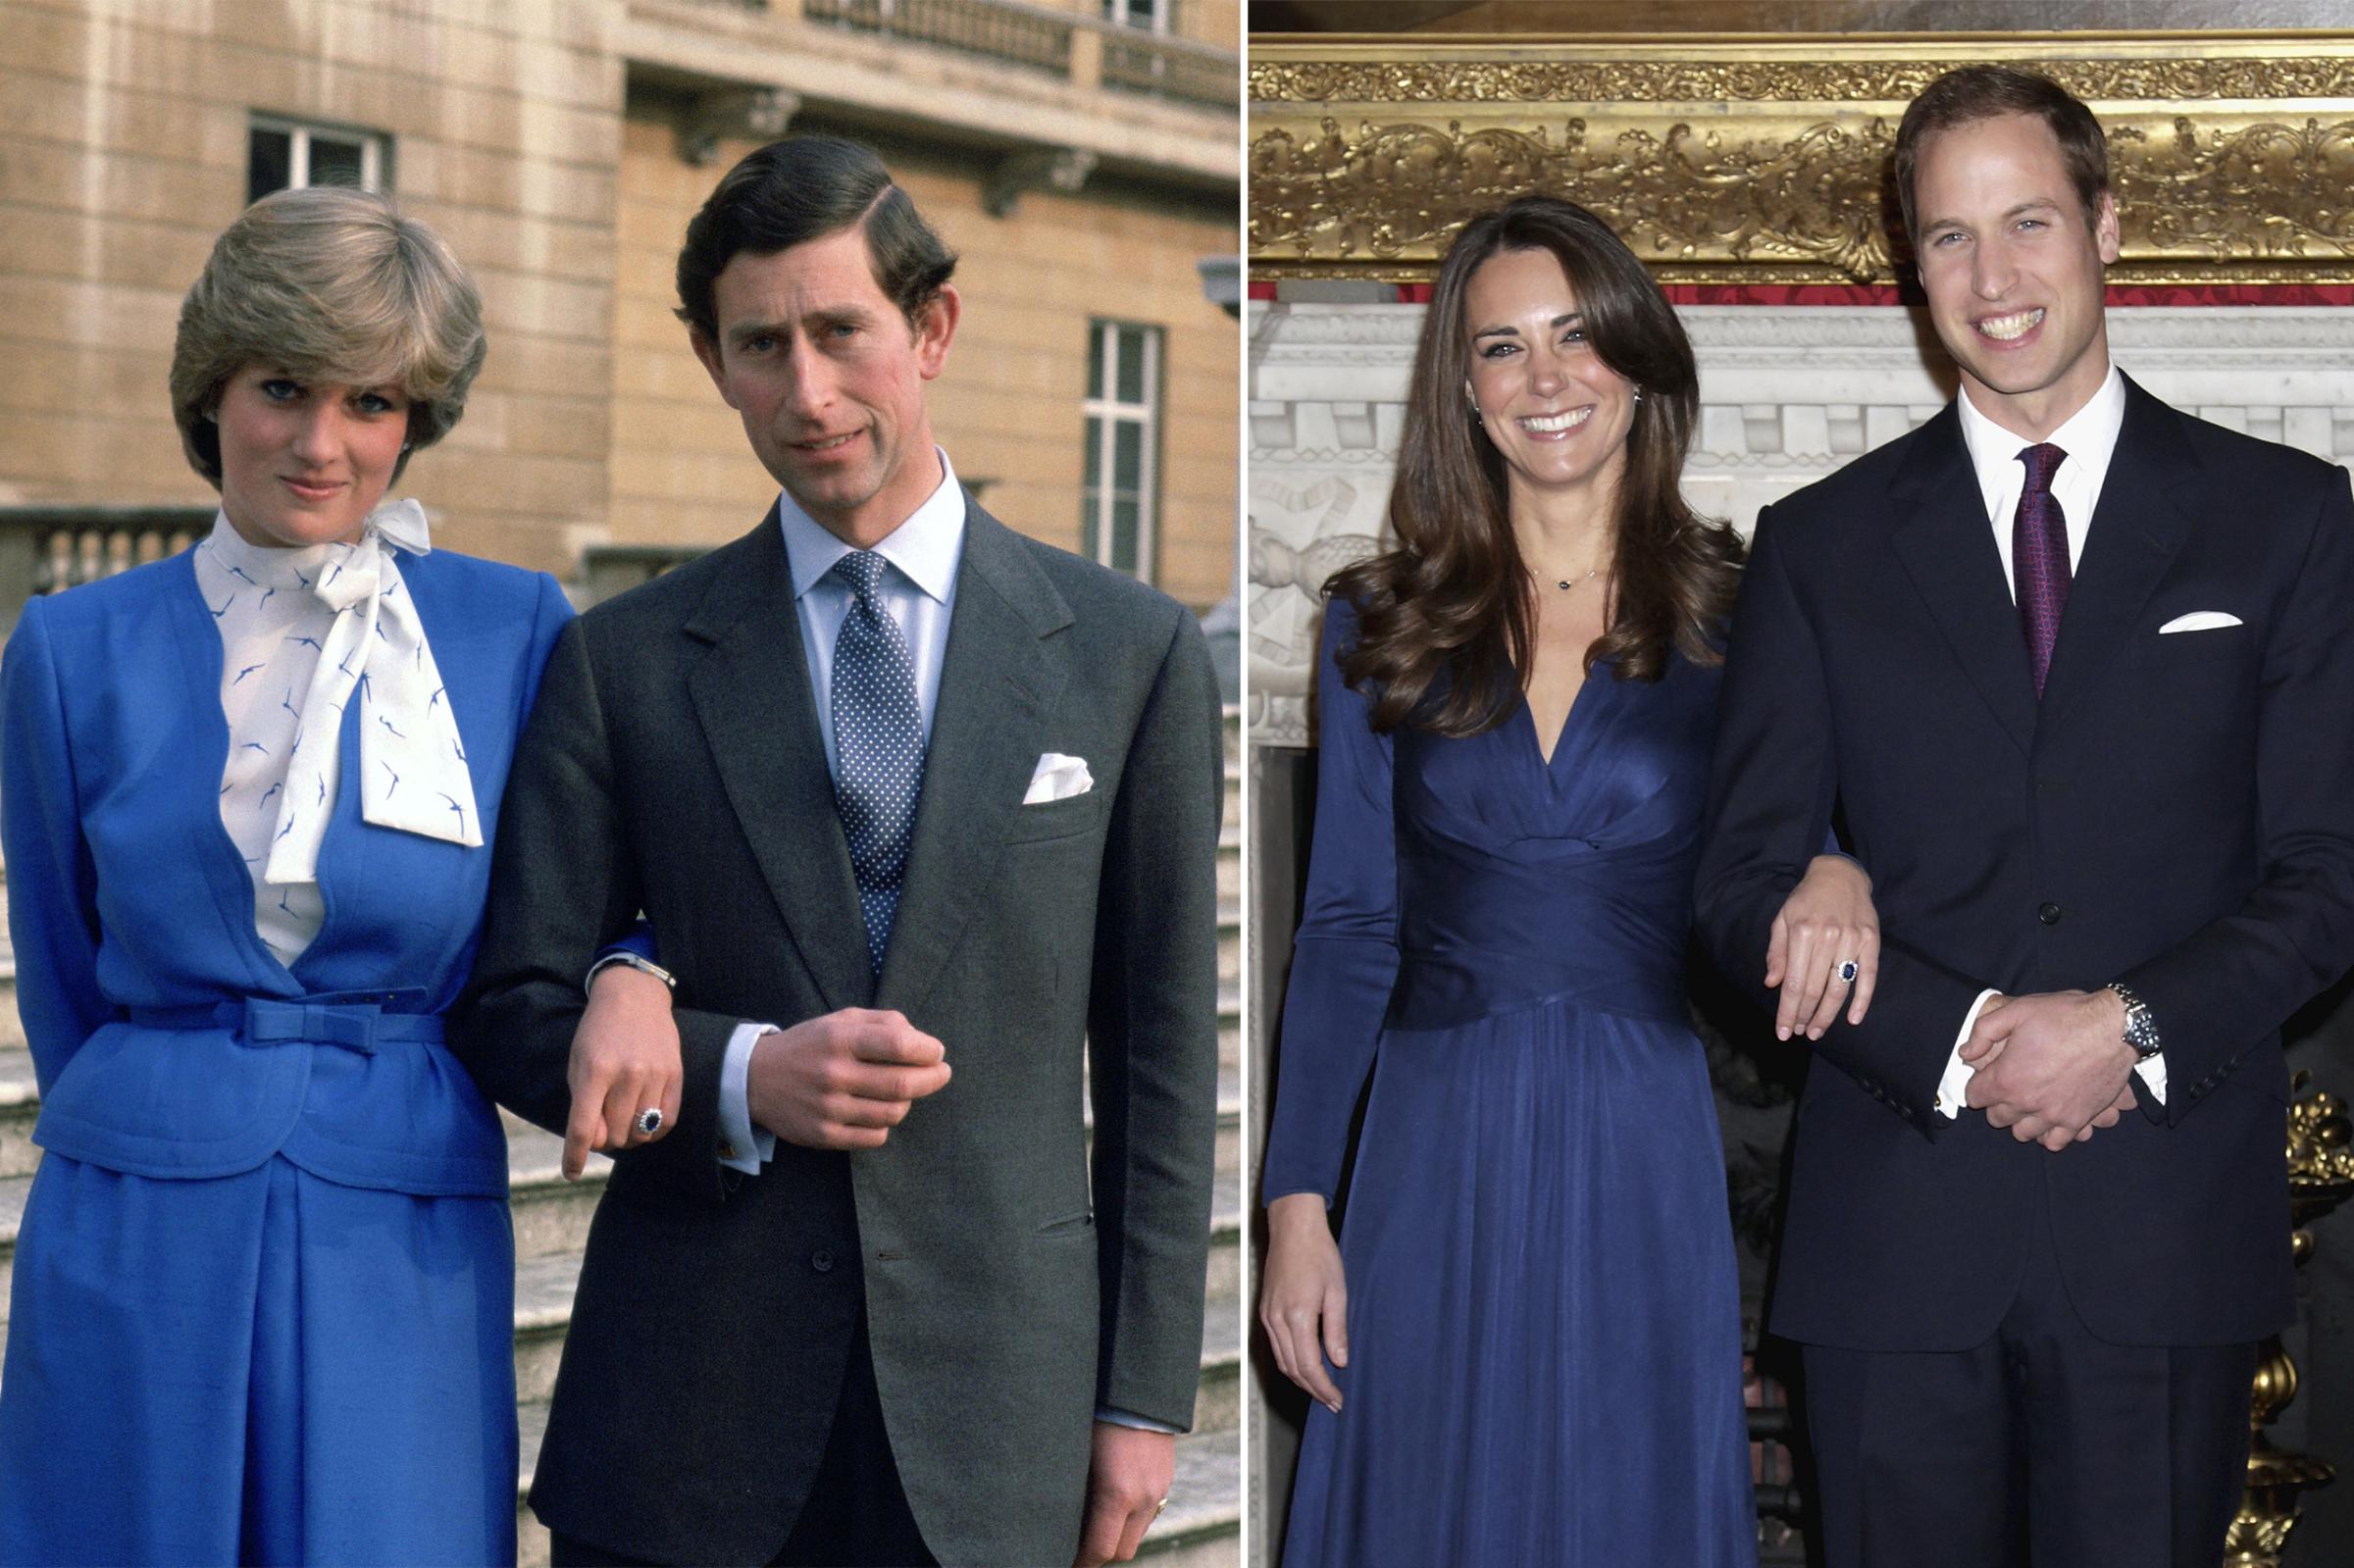 Left: Prince Charles arm-in-arm with fiancée Lady Diana Spencer on the steps of Buckingham Palace in London, Feb. 24, 1981. Right: Prince William and Kate Middleton pose after the announcement of their engagement in the State Apartments of St. James Palace, London, Nov. 16, 2010.